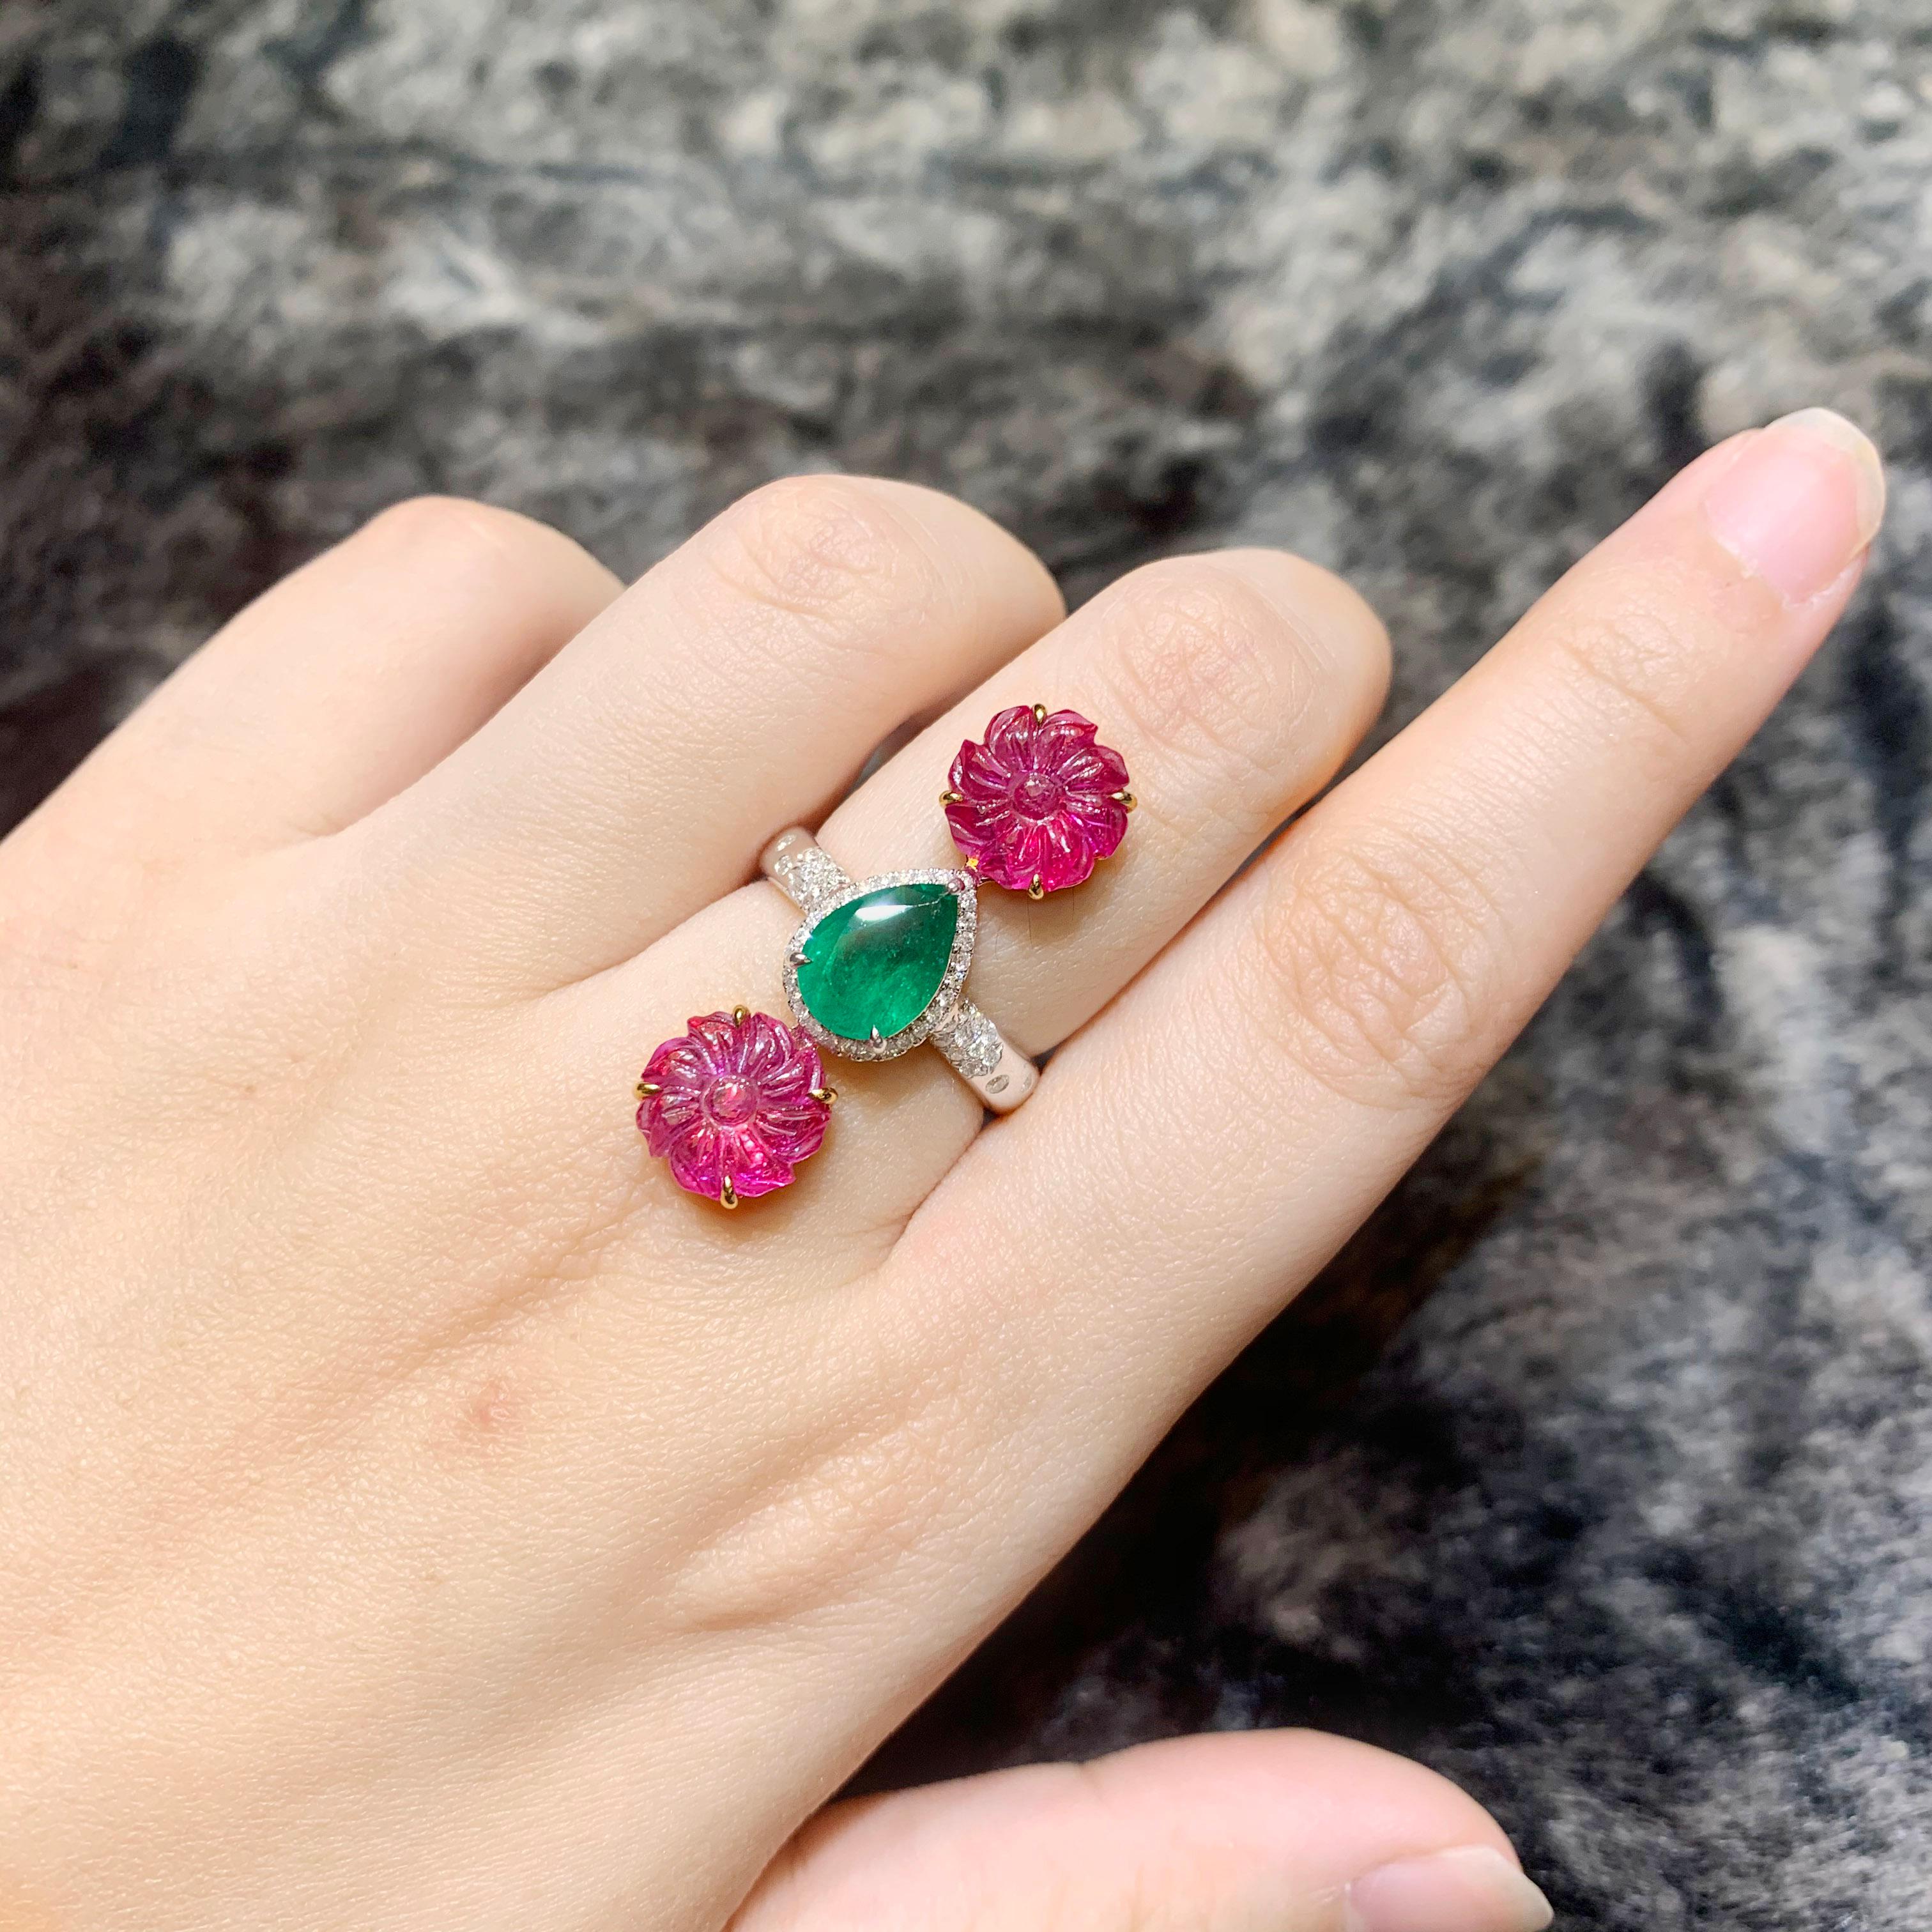 Intricately carved , two pieces of vivid red Mozambique ruby is set along 1.55 carat of Zambian vivid green emerald. The ring also has 0.25 carat of white round brilliant diamond.